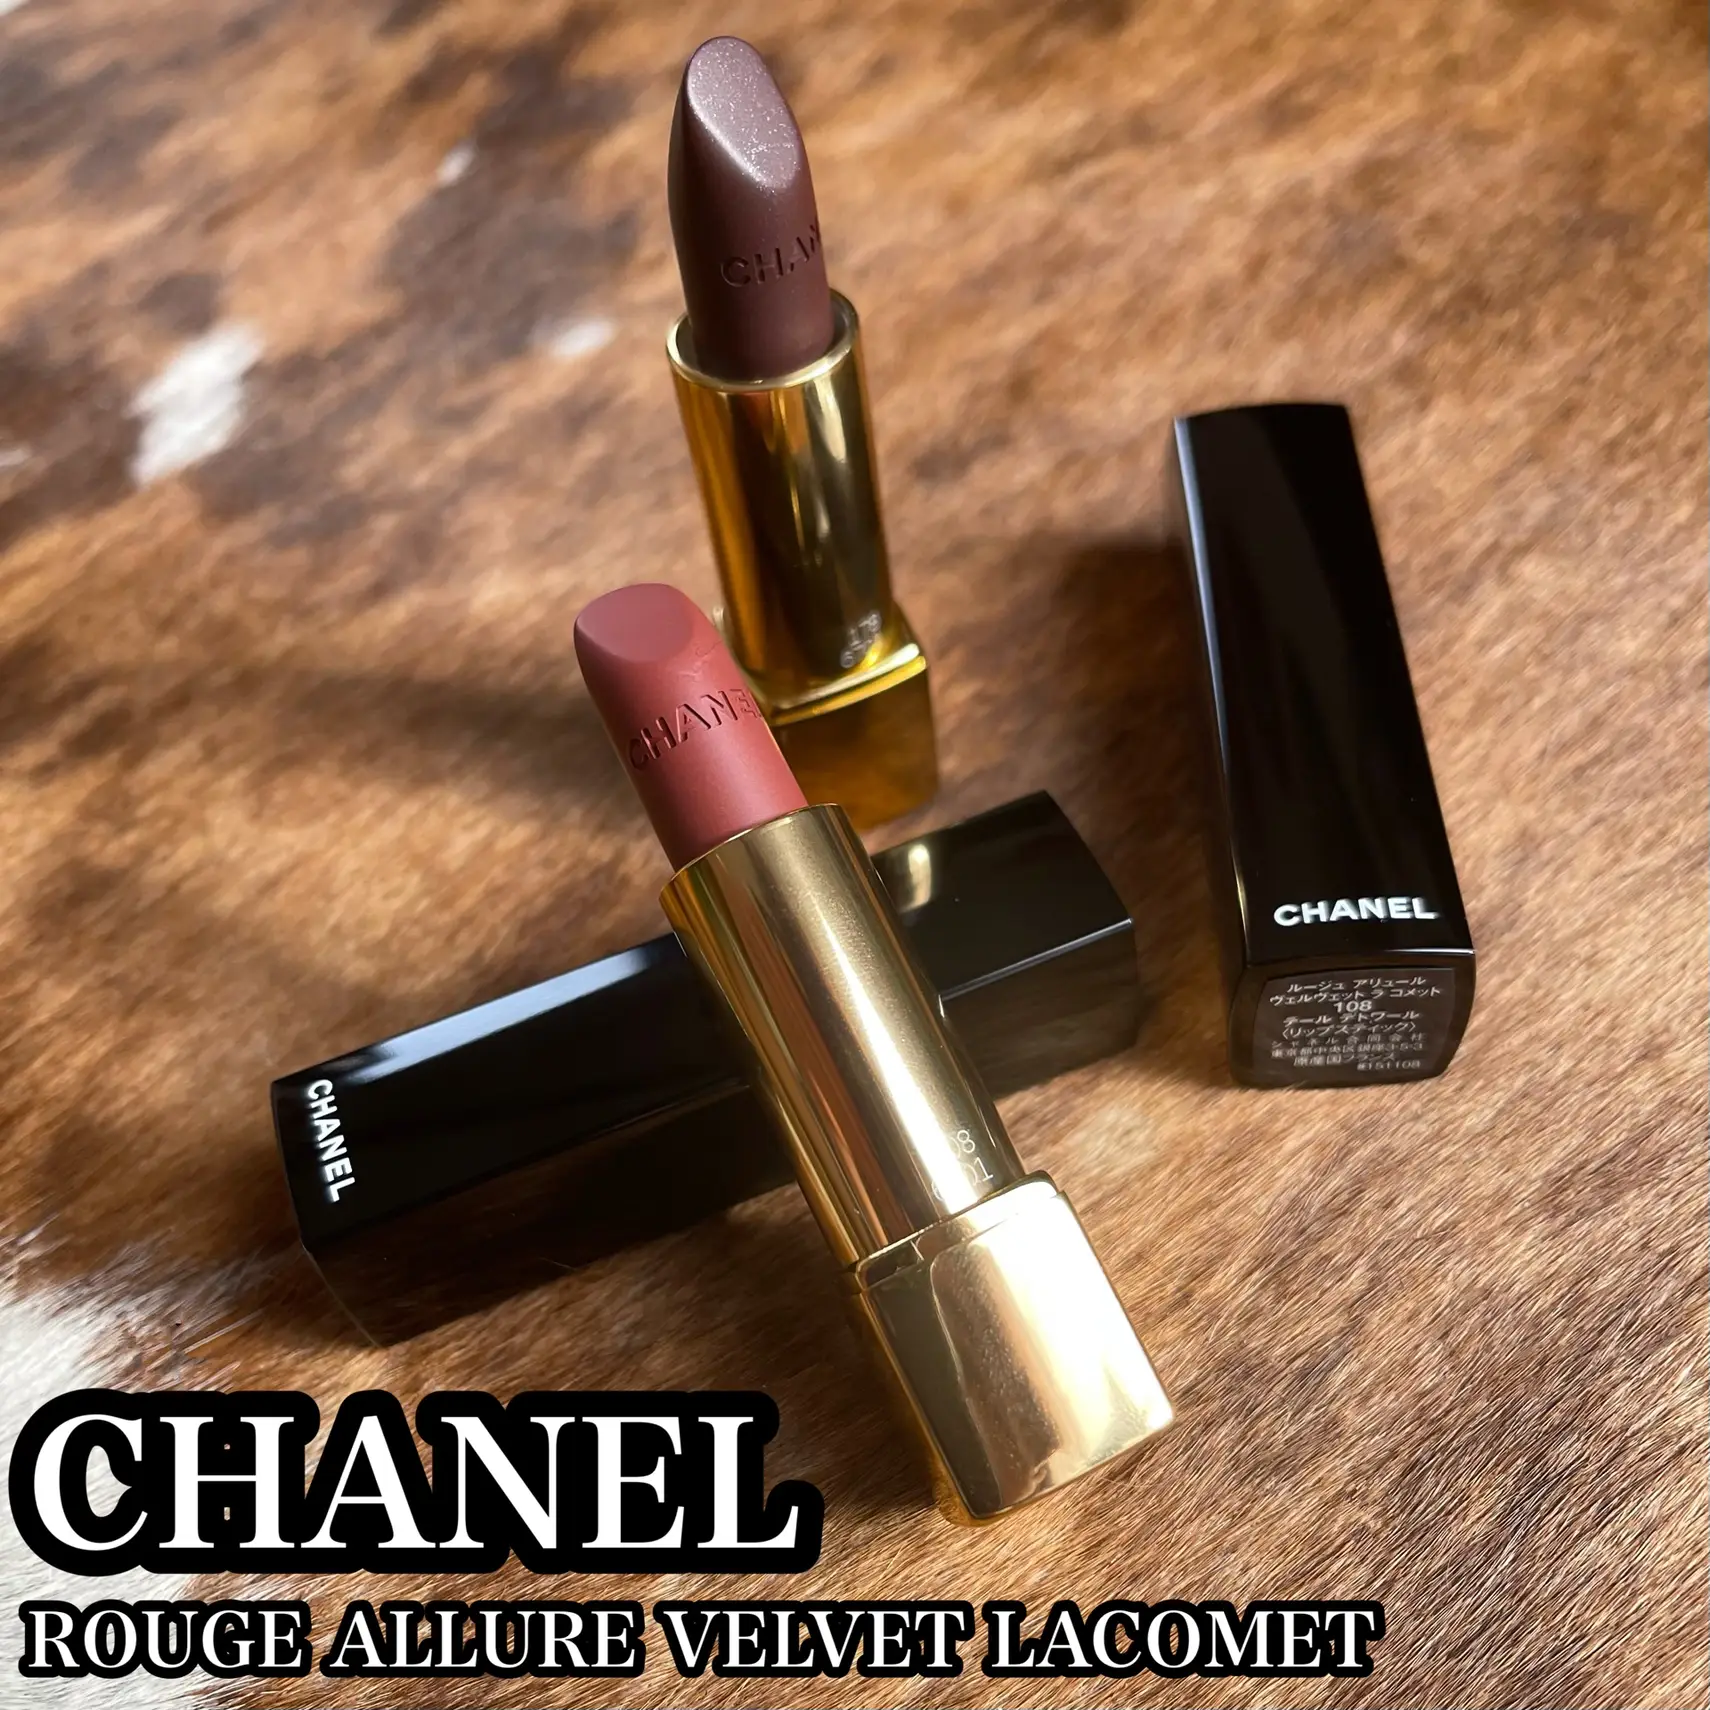 CHANELROUGE SPEED LACOMET, Gallery posted by chamaru222